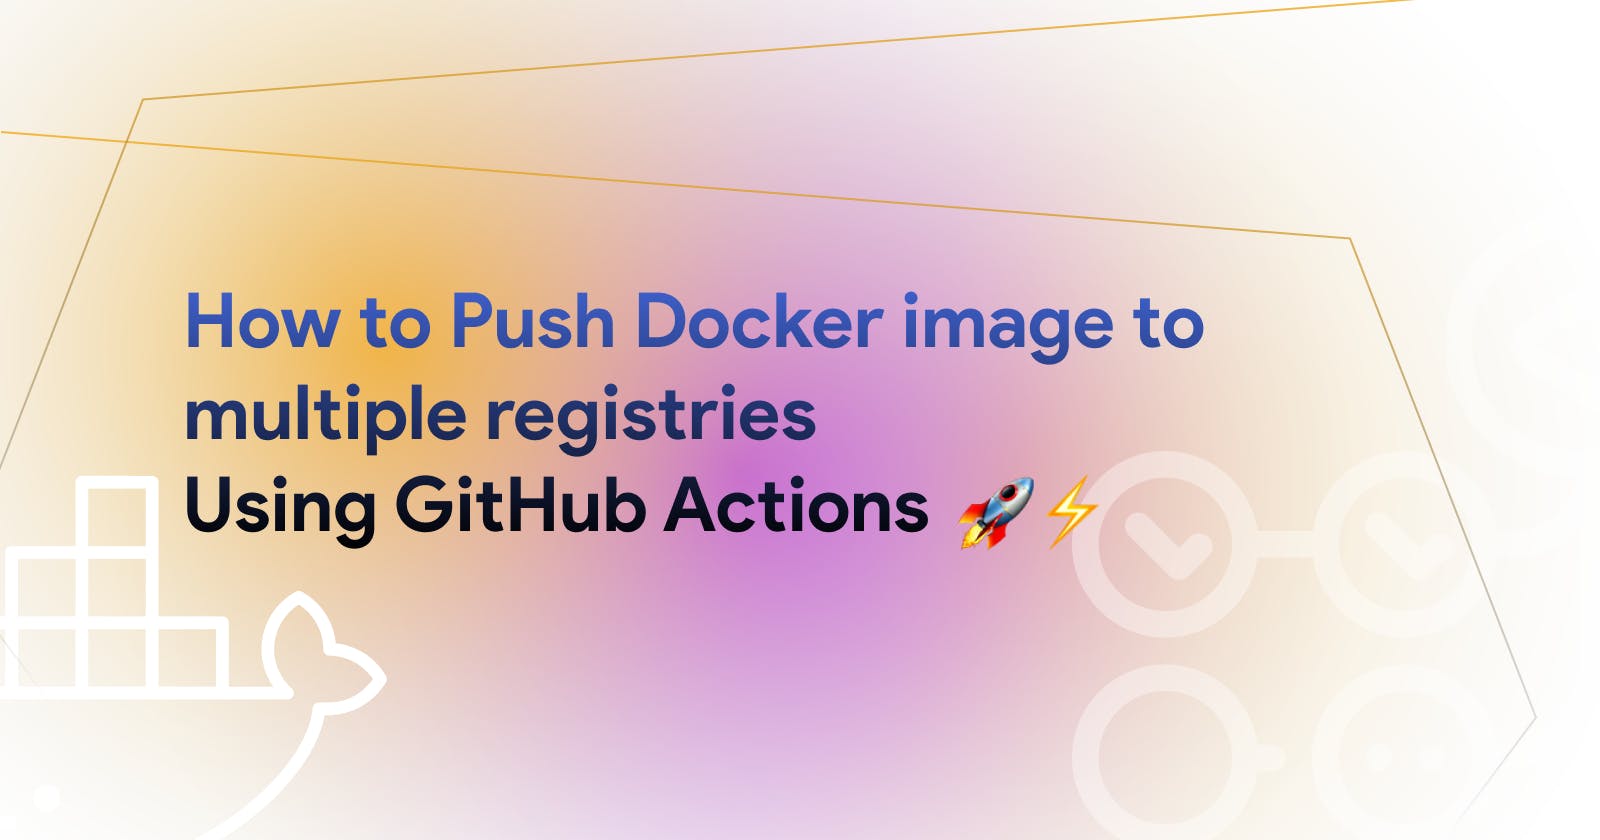 How to Push Docker image to multiple registries
Using GitHub Actions 🚀⚡